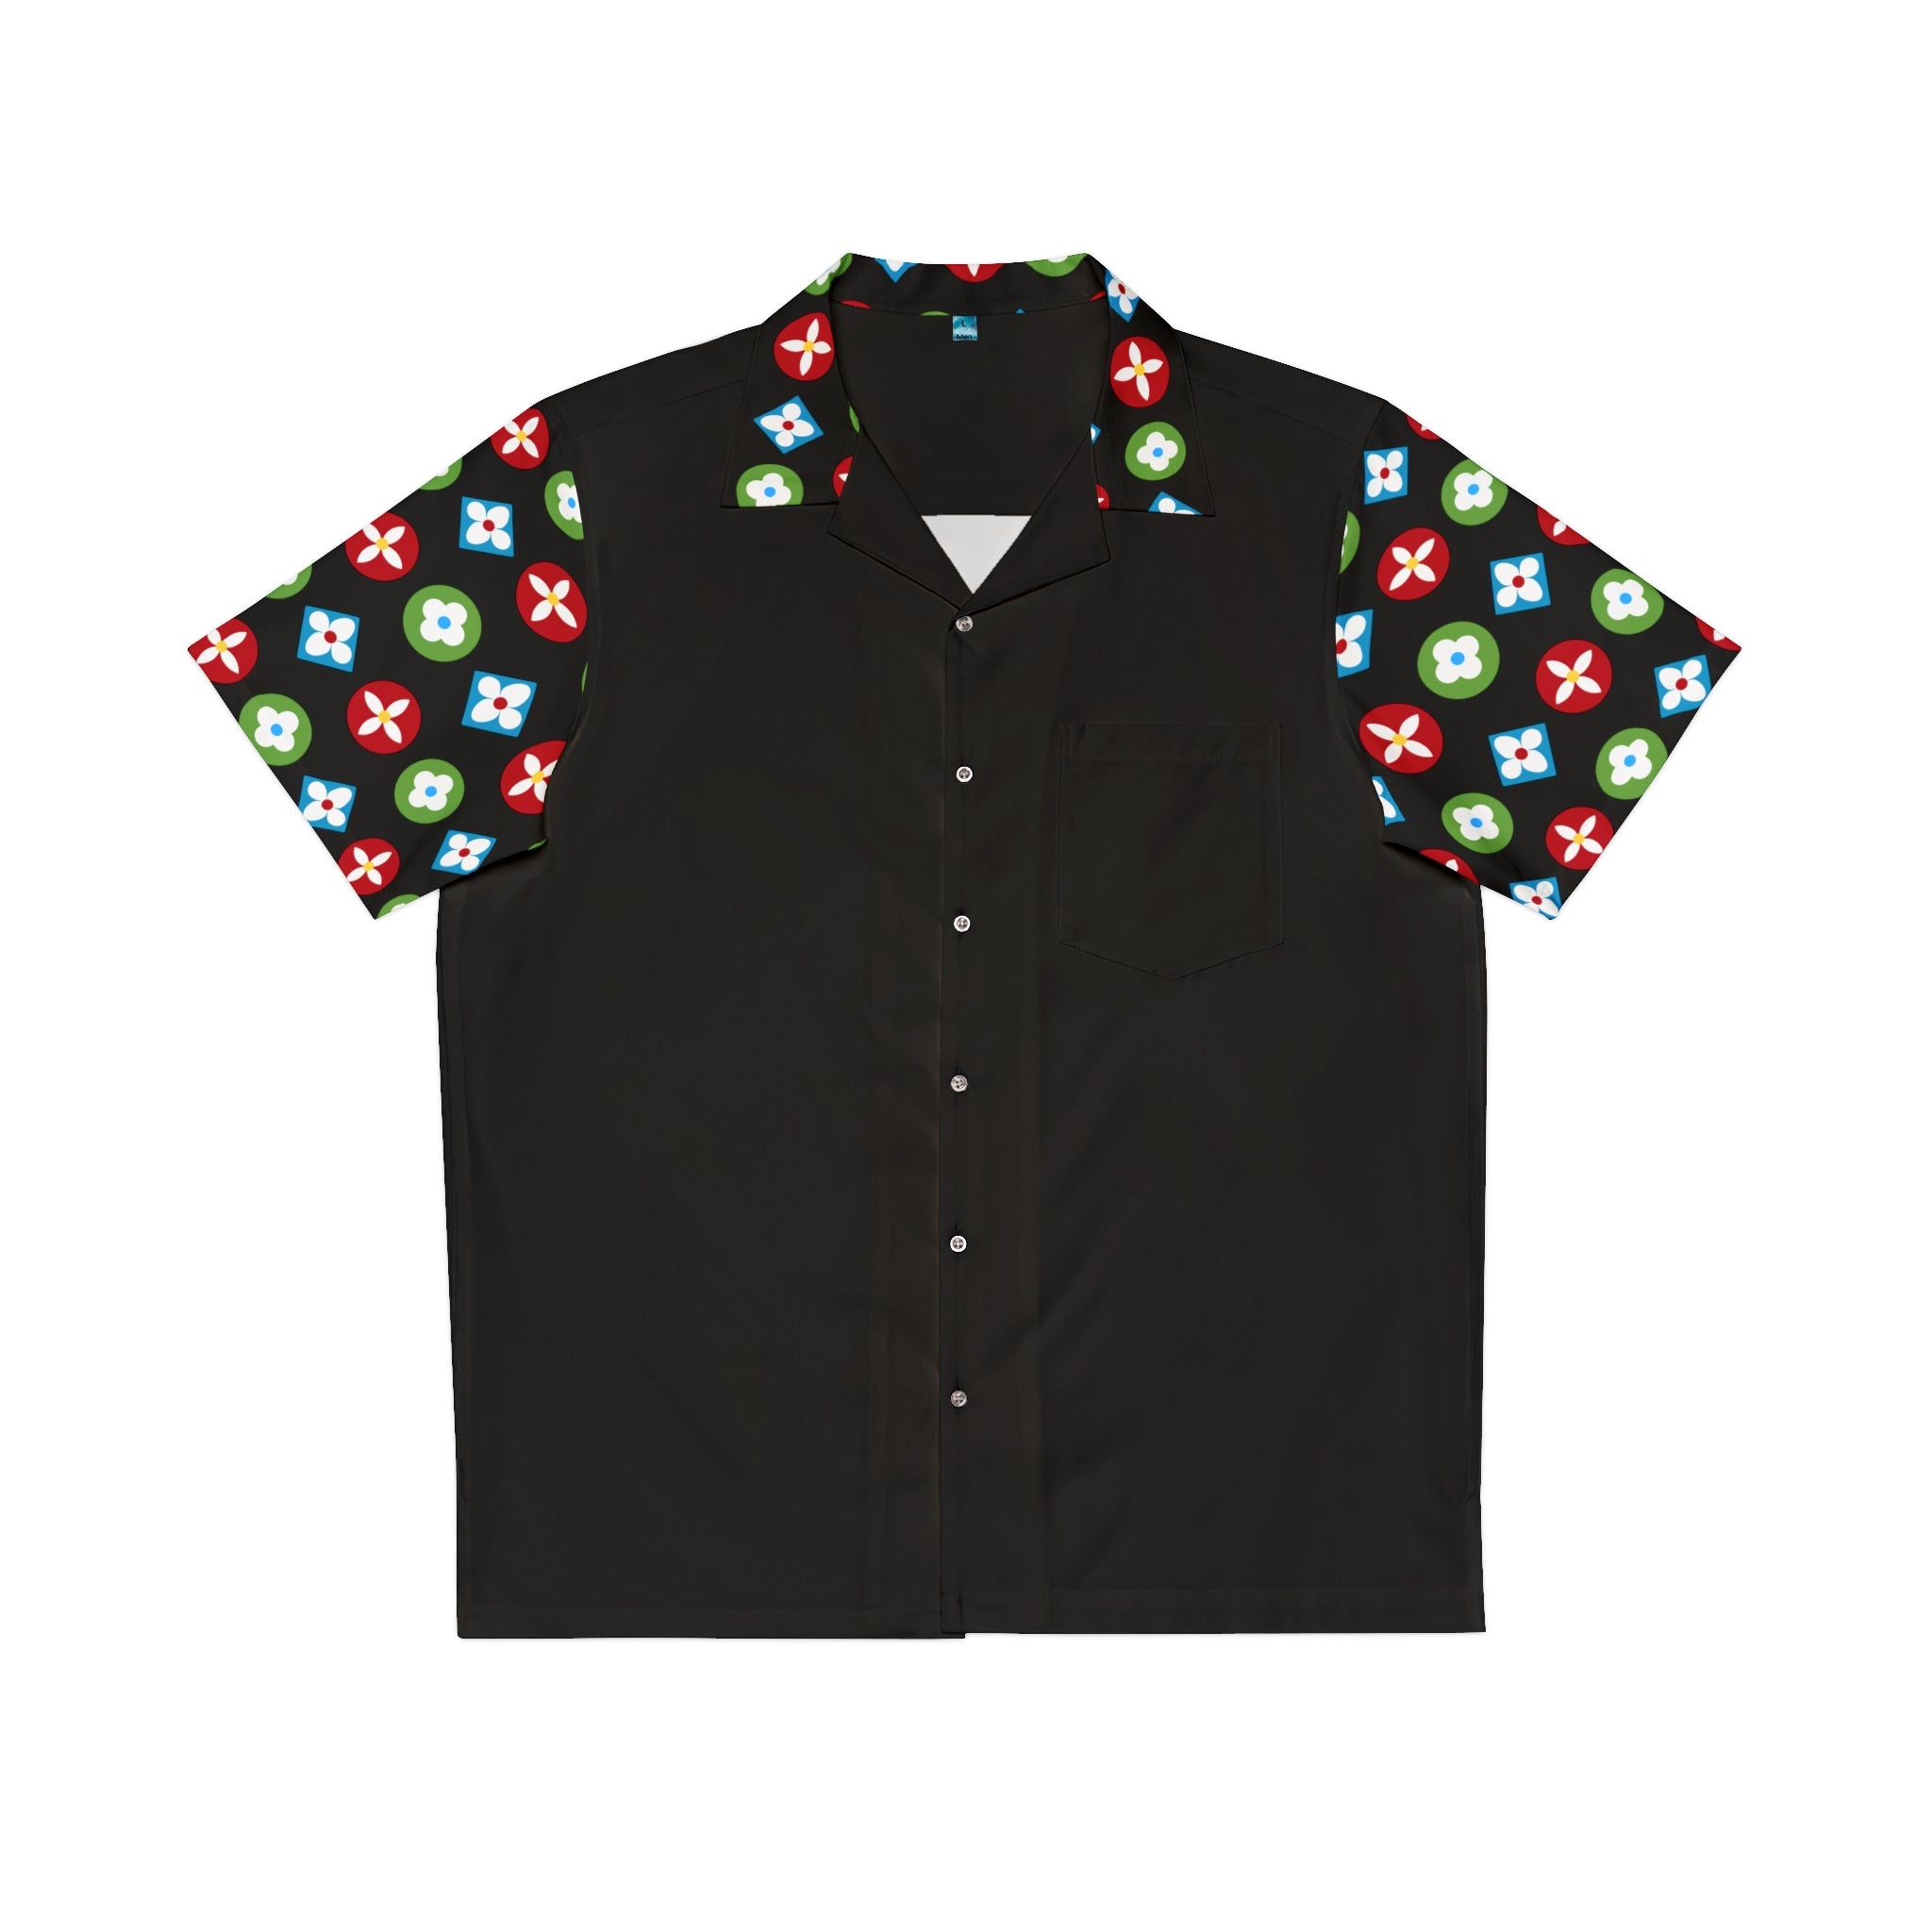 Groove Collection Trilogy of Icons Solid Block (Red, Green, Blue) Black Unisex Gender Neutral Button Up Shirt, Hawaiian Shirt